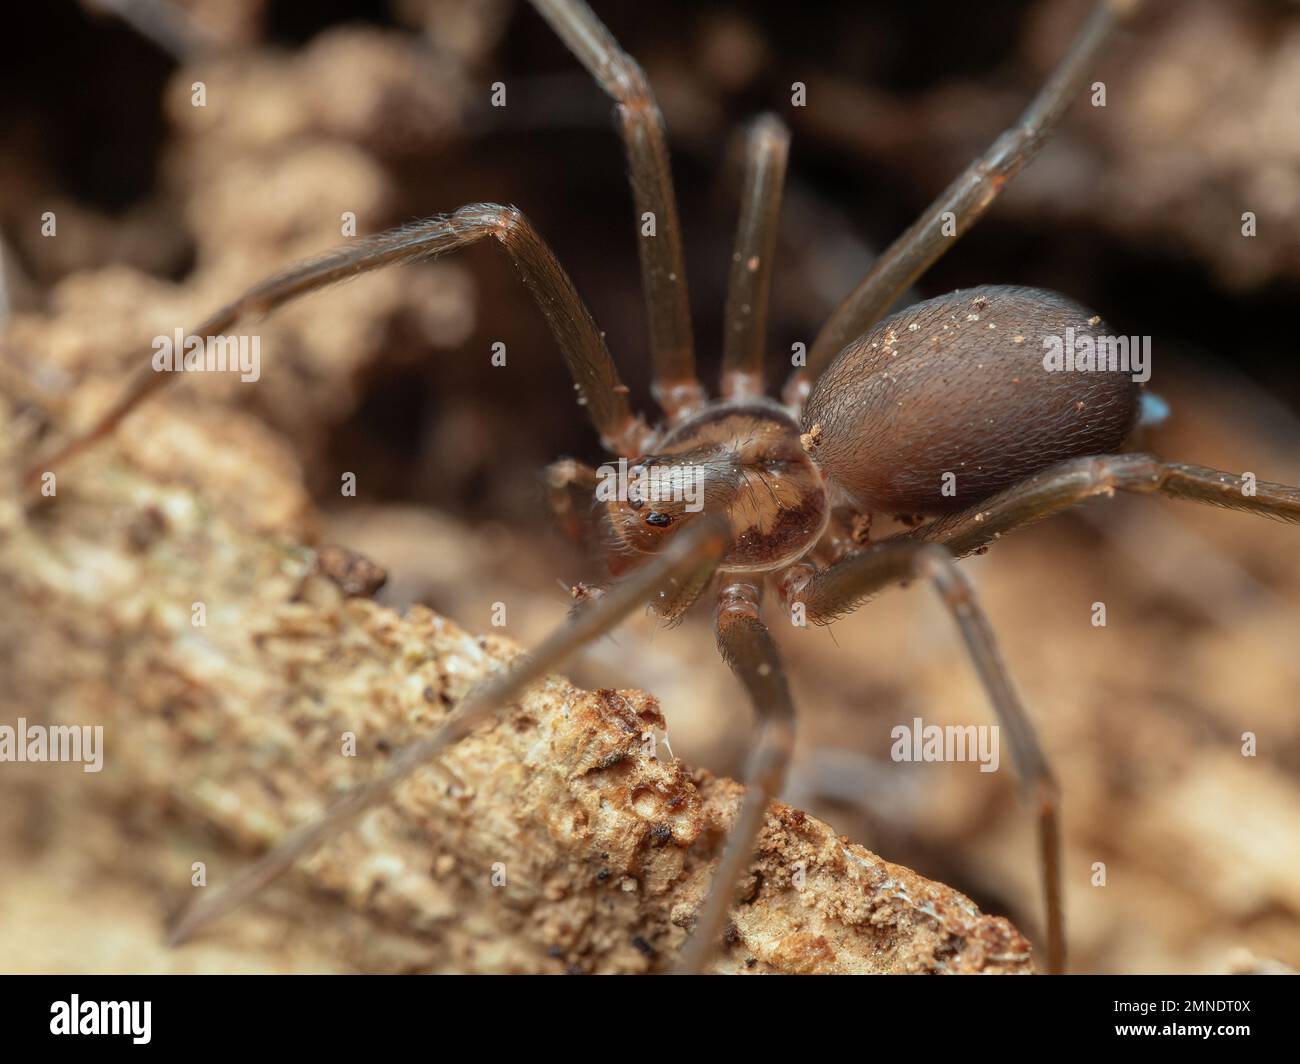 Detailed portrait of a Loxosceles (brown recluse spider), macrophotography of a venomous species with medically significant bites. Stock Photo